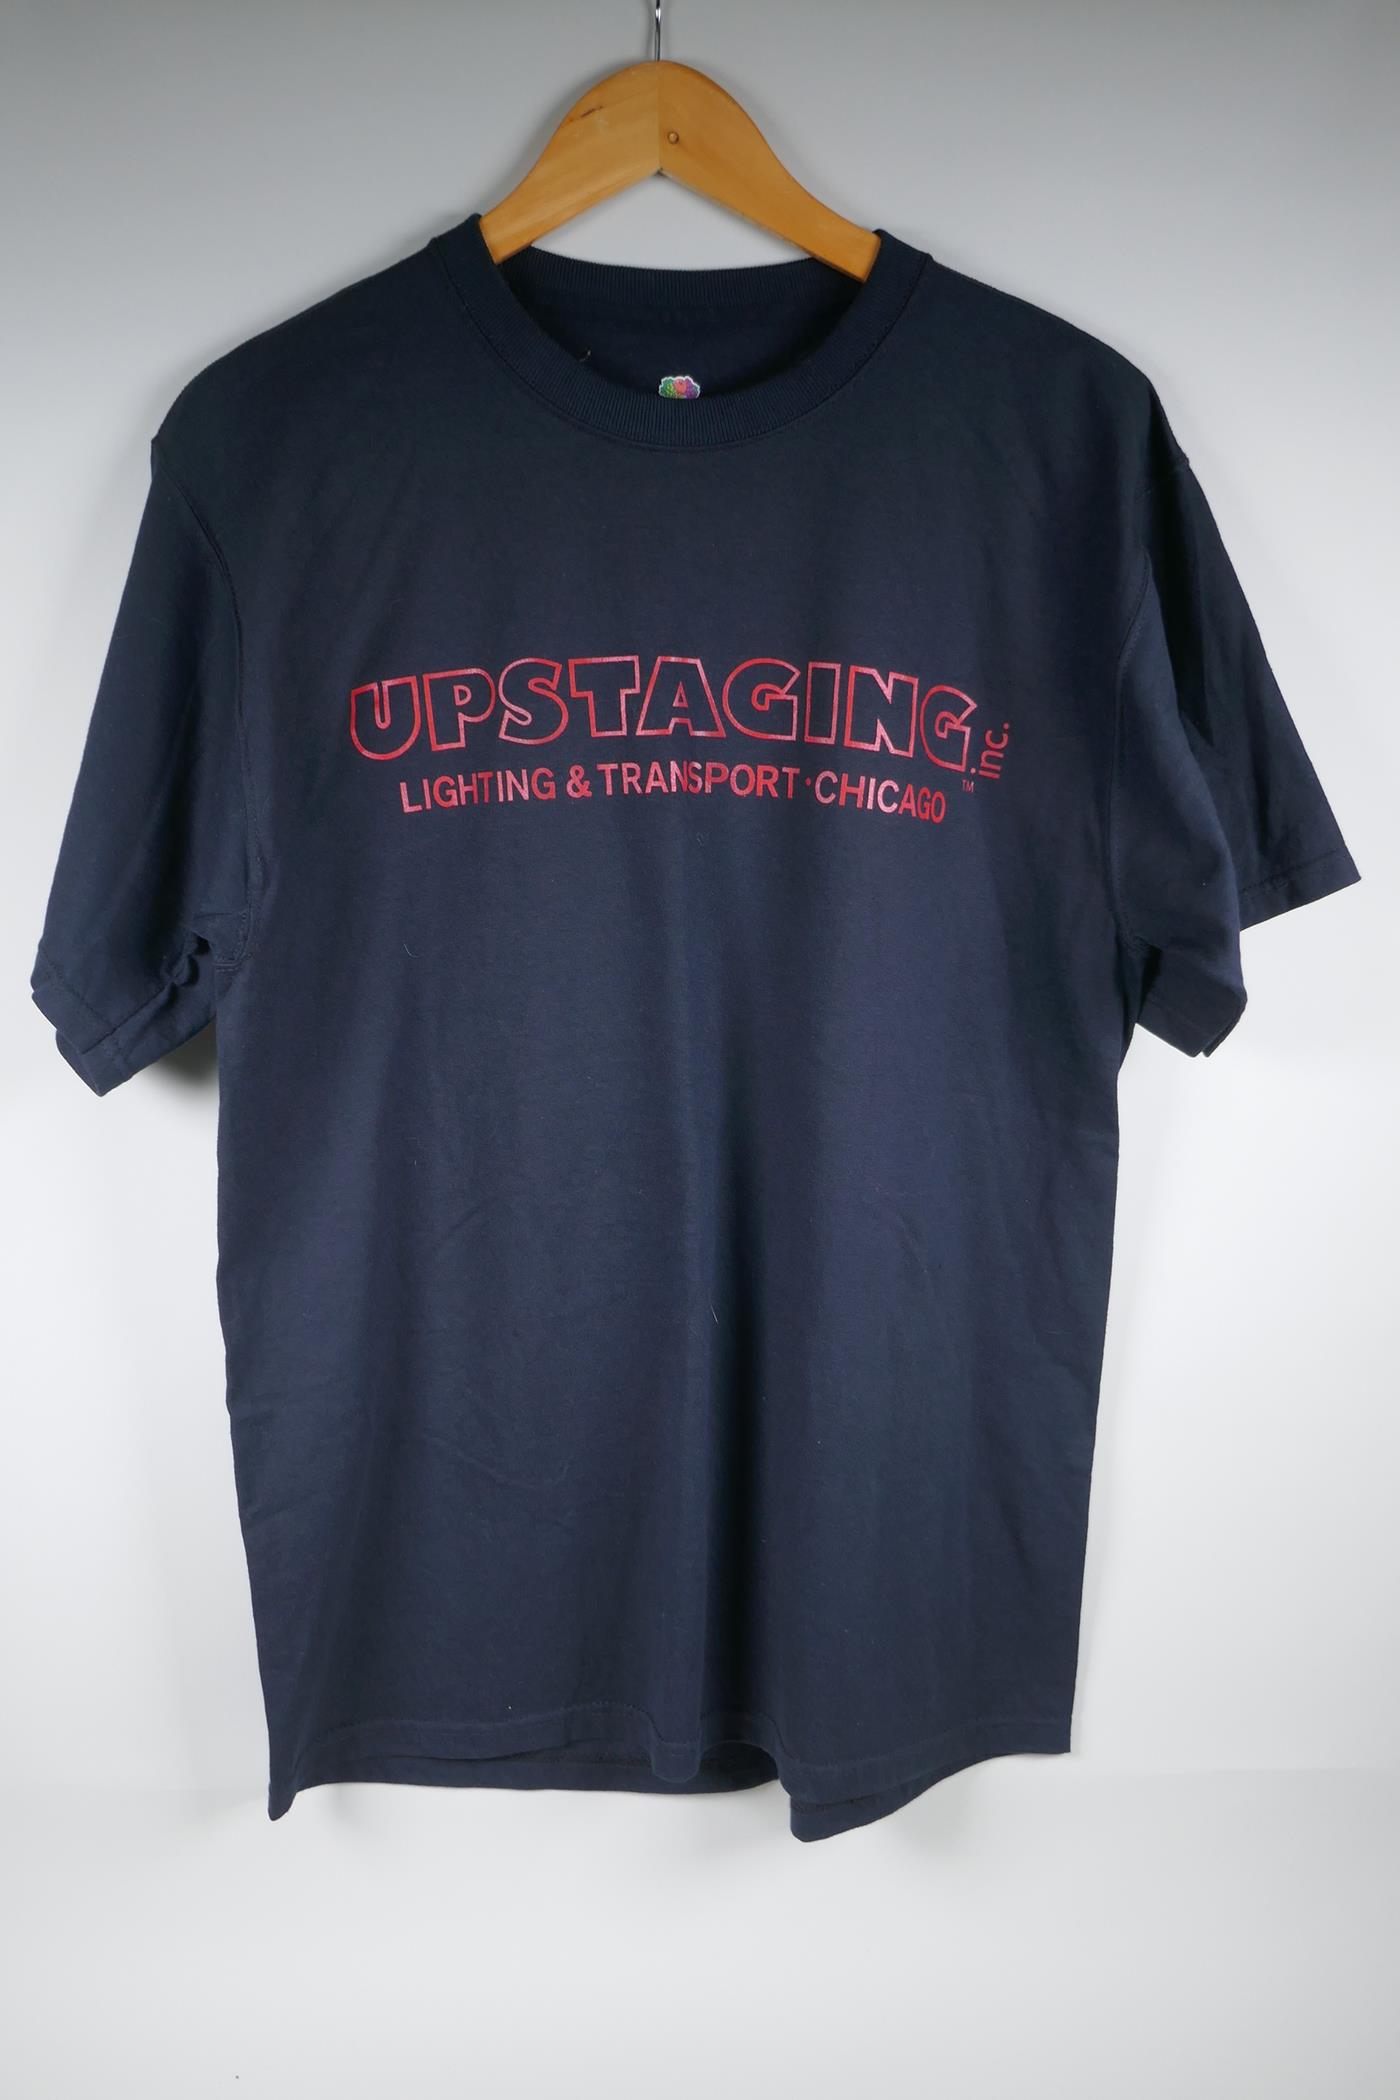 A crew tour T-shirt for The Police North America 2008 tour, size L/G - Image 3 of 4